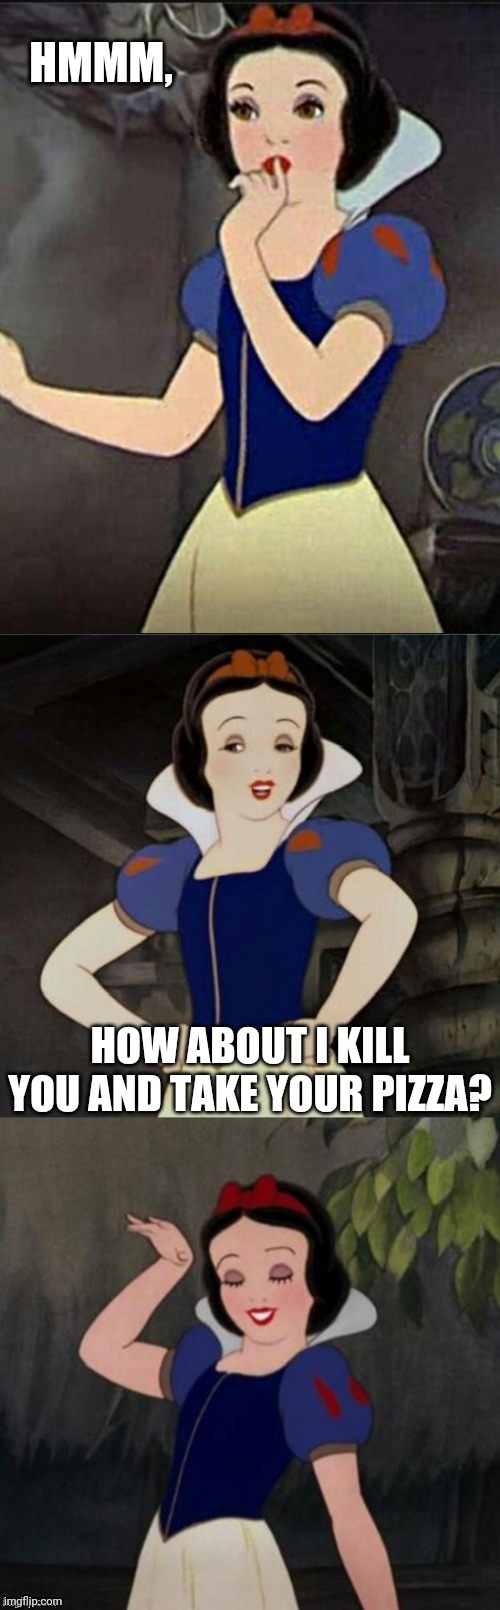 Snow White joke template | HMMM, HOW ABOUT I KILL YOU AND TAKE YOUR PIZZA? | image tagged in snow white joke template | made w/ Imgflip meme maker